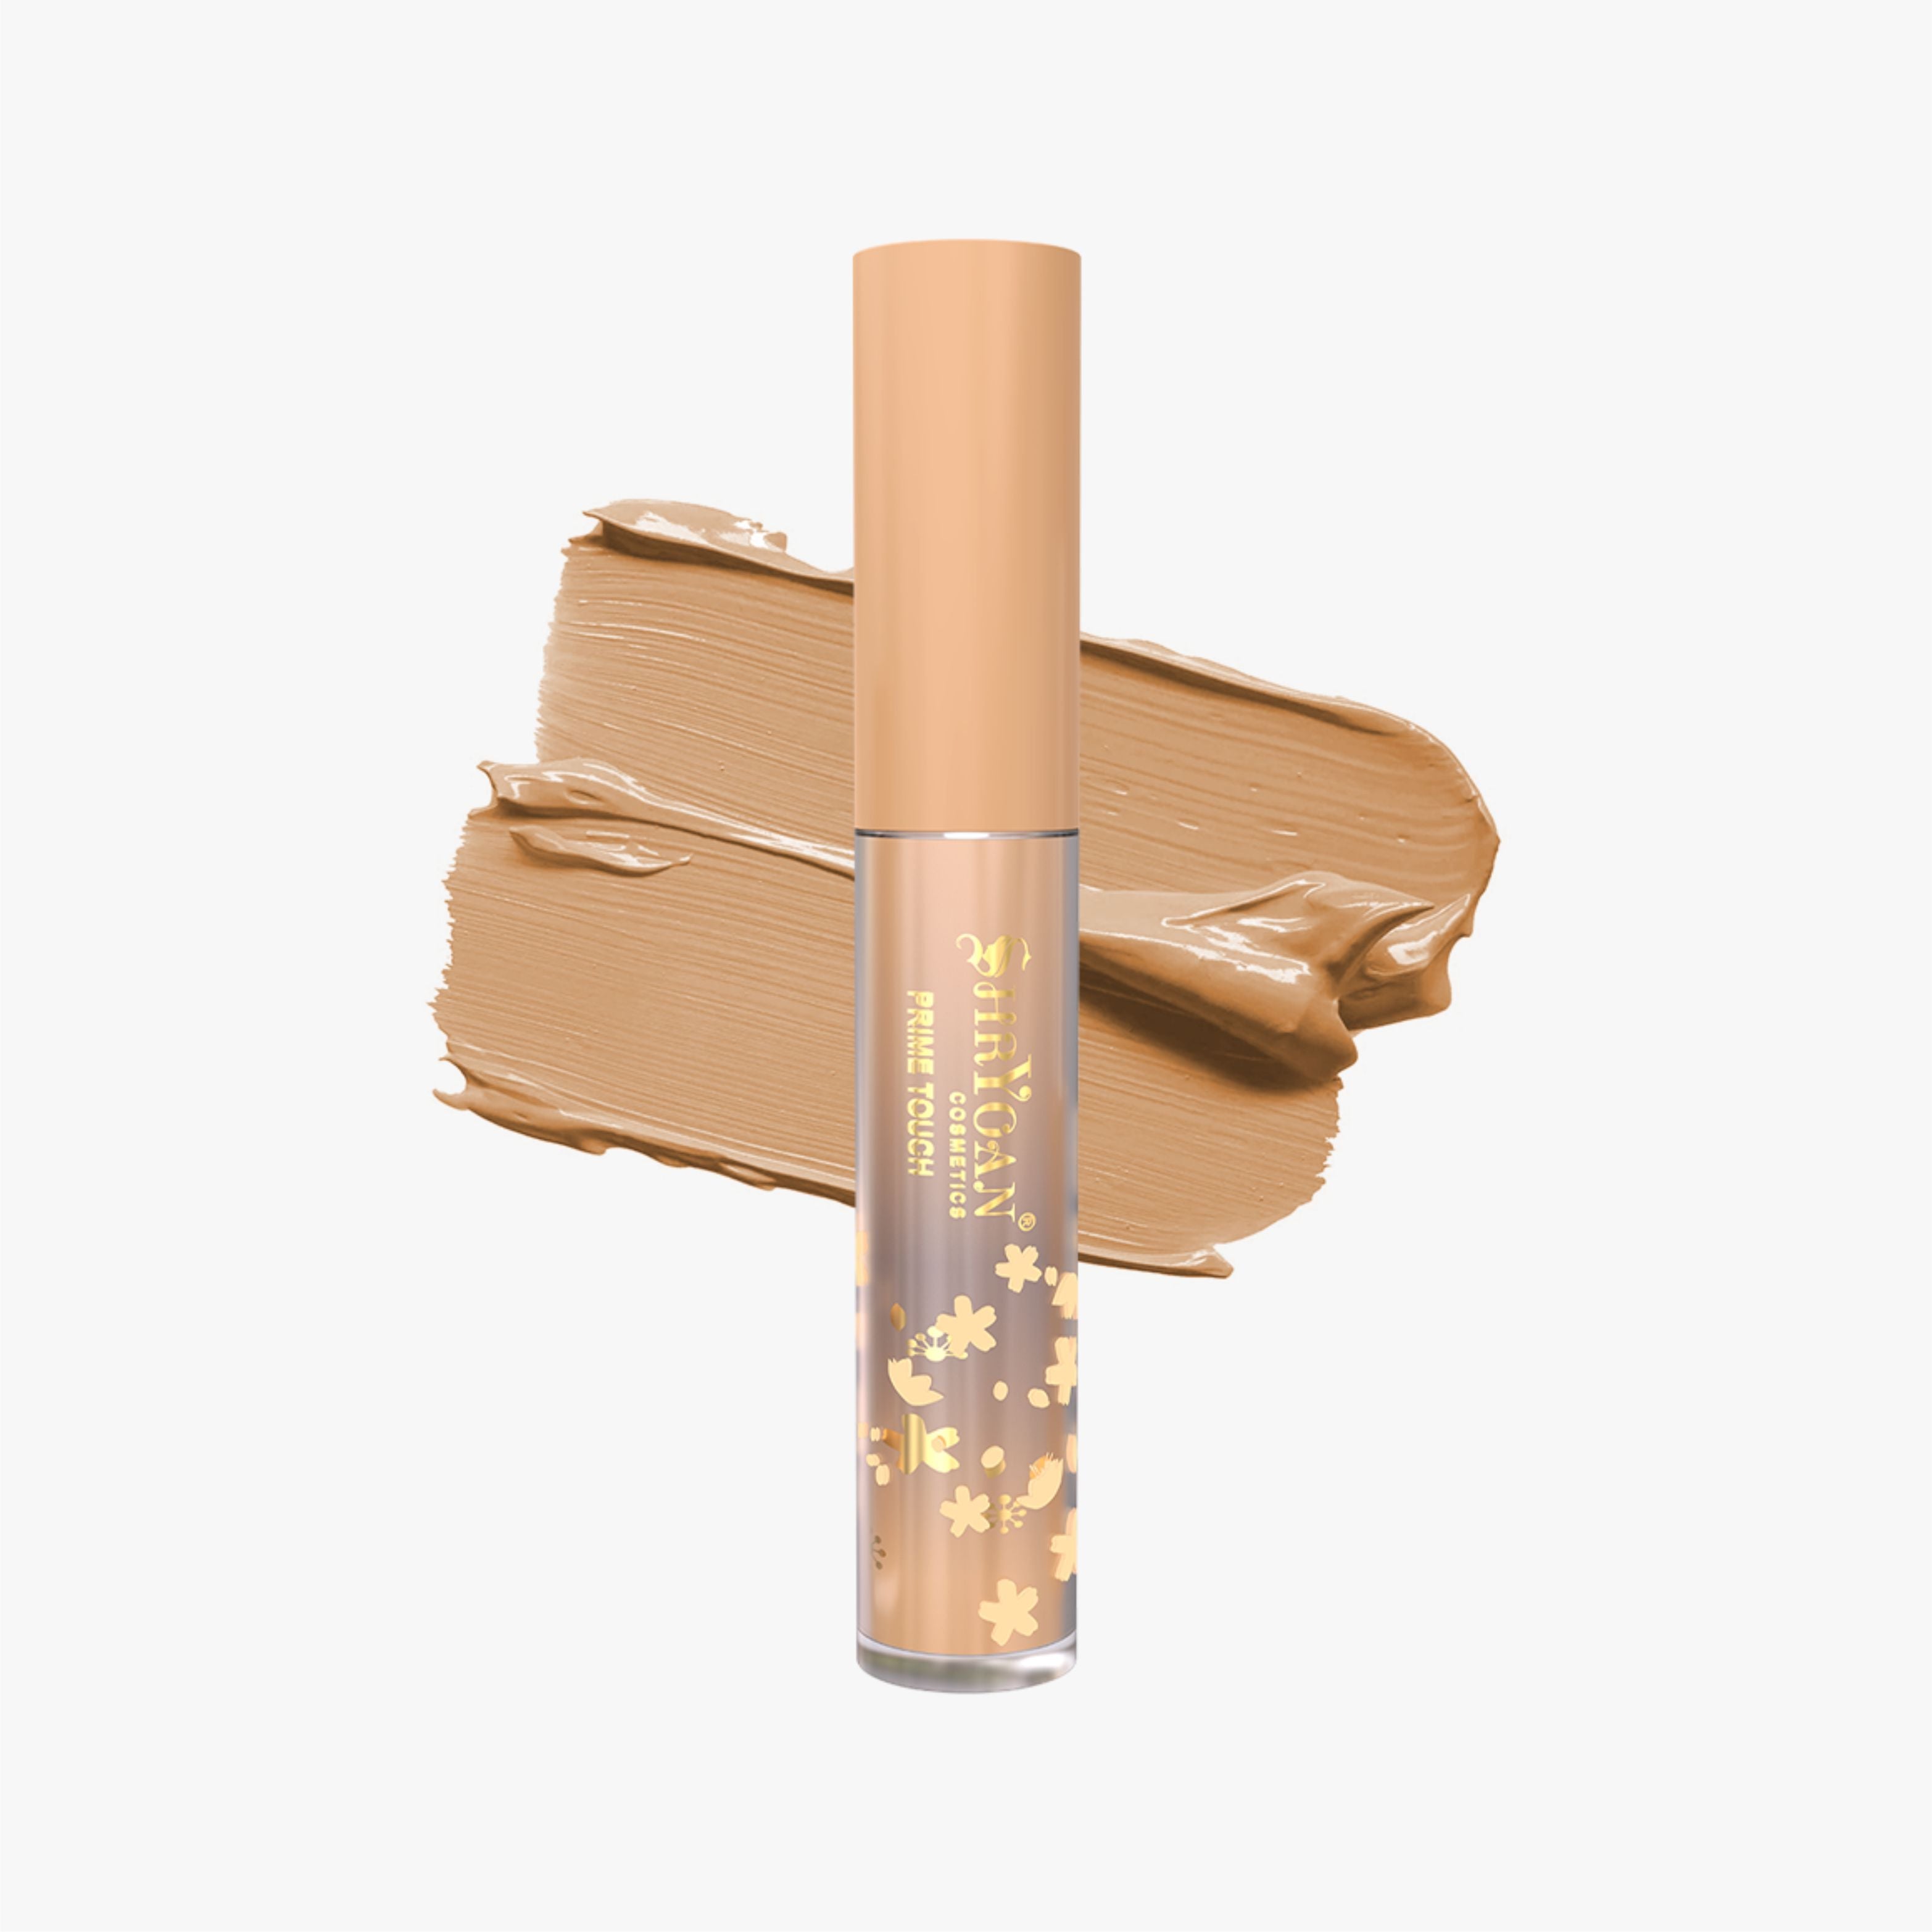 Shryoan Primer Touch Liquid Concealer